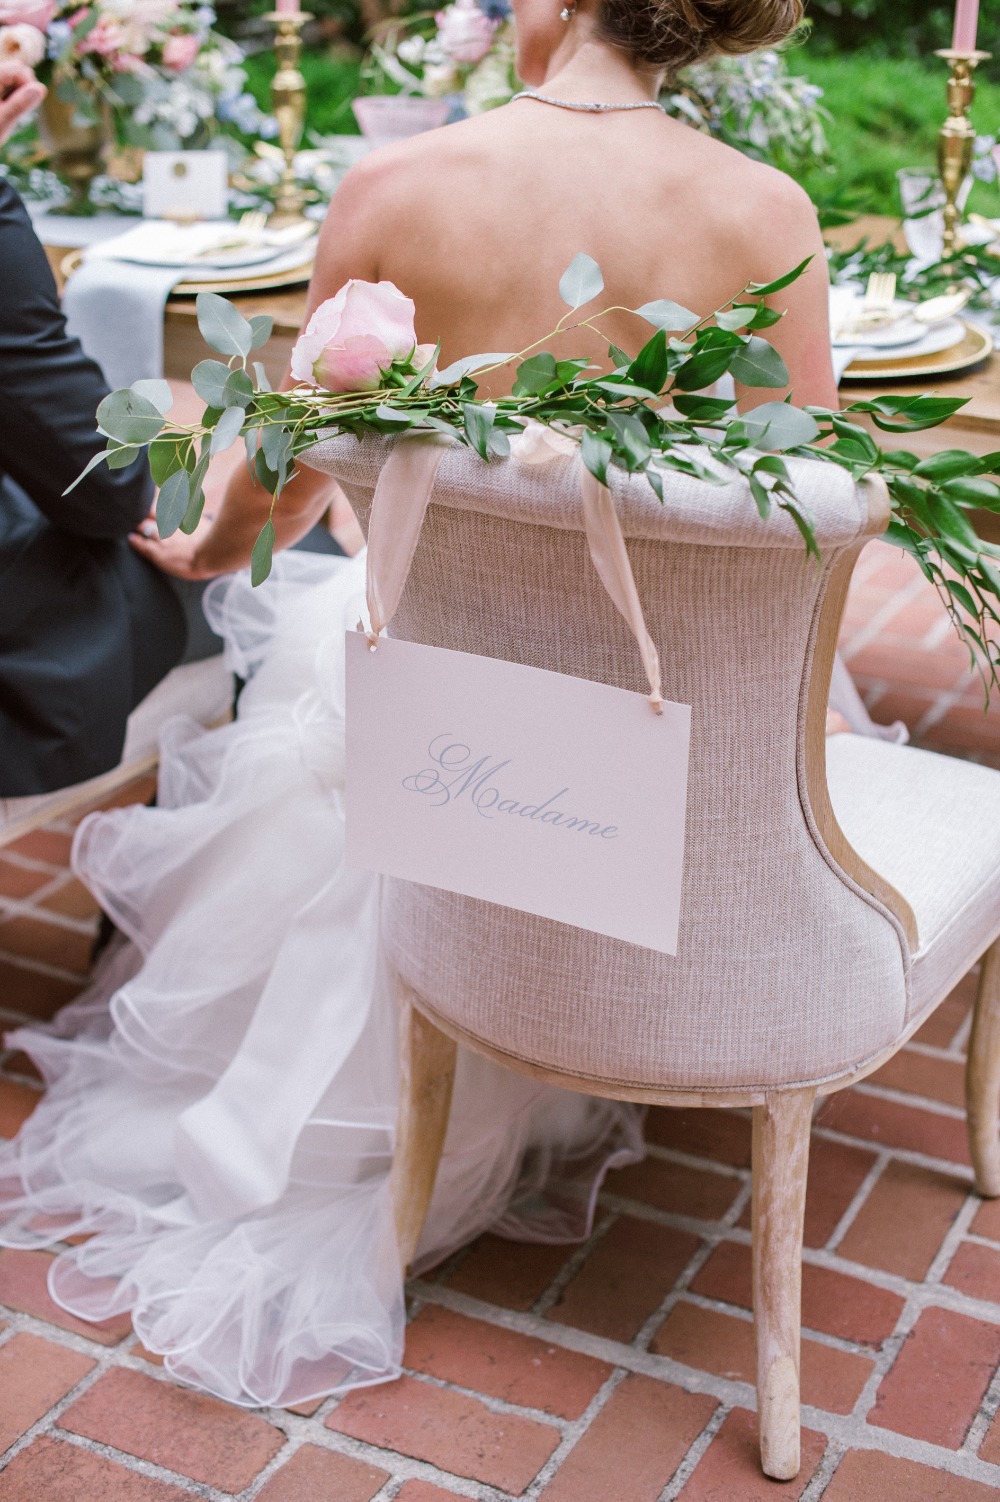 Madame brides wedding seat sign with flower garland draped chair